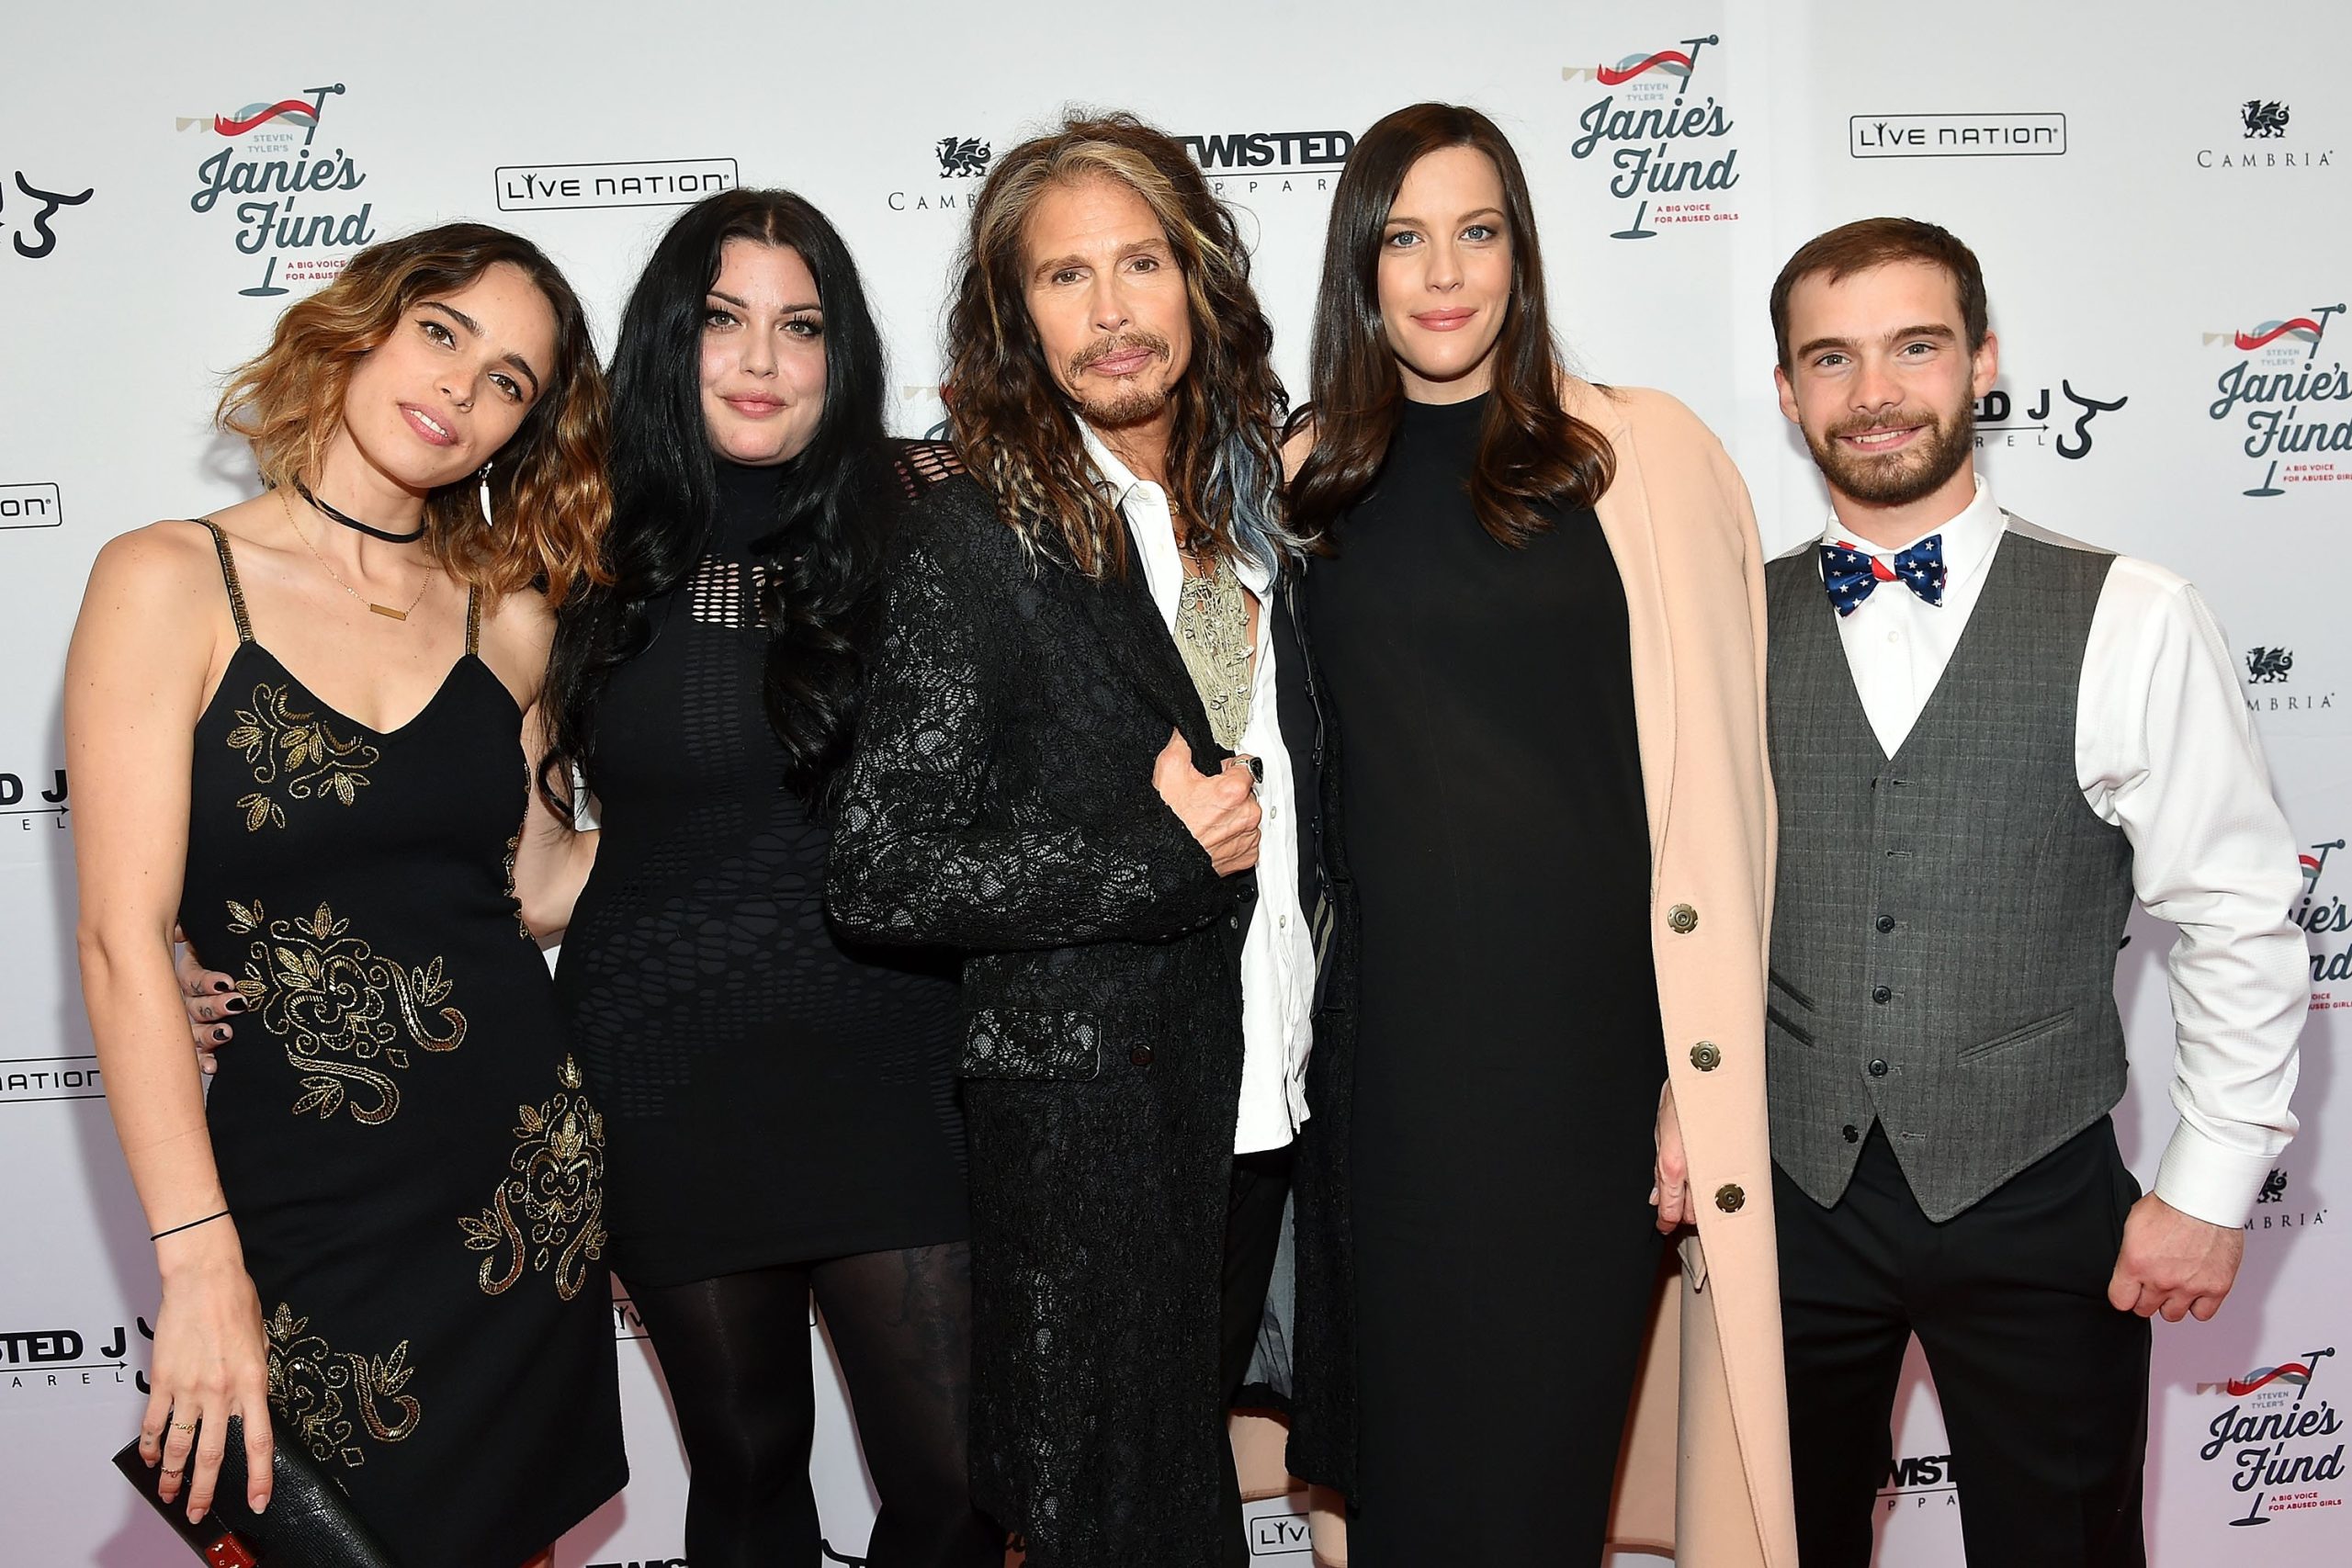 Musician Steven Tyler and his children Chelsea, Mia and Liv Tyler and Taj  Talerico attend the Steven TylerOut on a Limb concert to benefit Janie's  Fund at David Geffen Hall at Lincoln